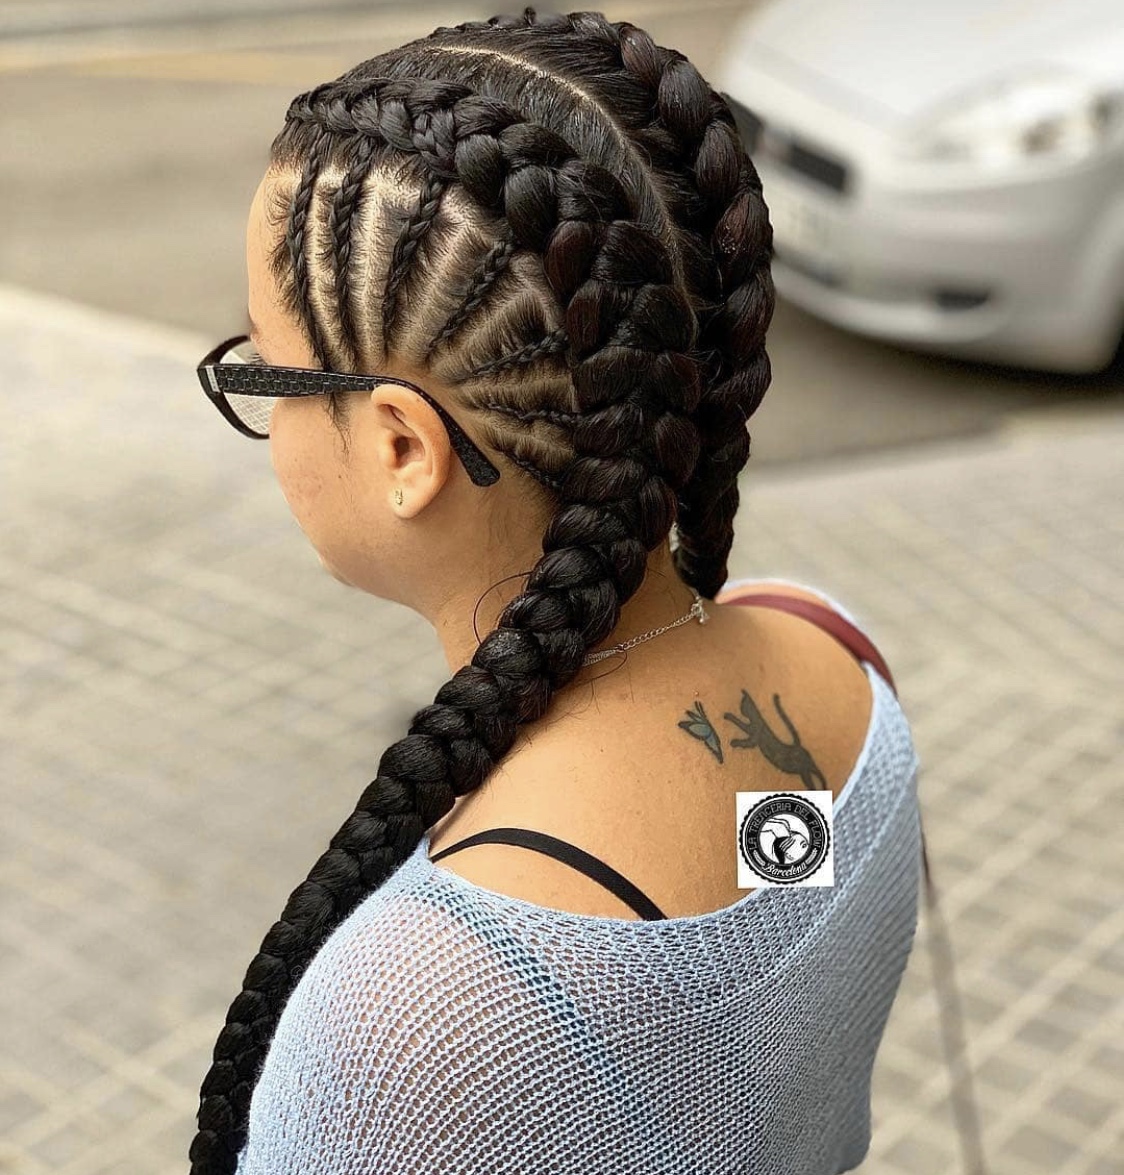 46 Braided Hairstyles For Black Women To Try In 2021